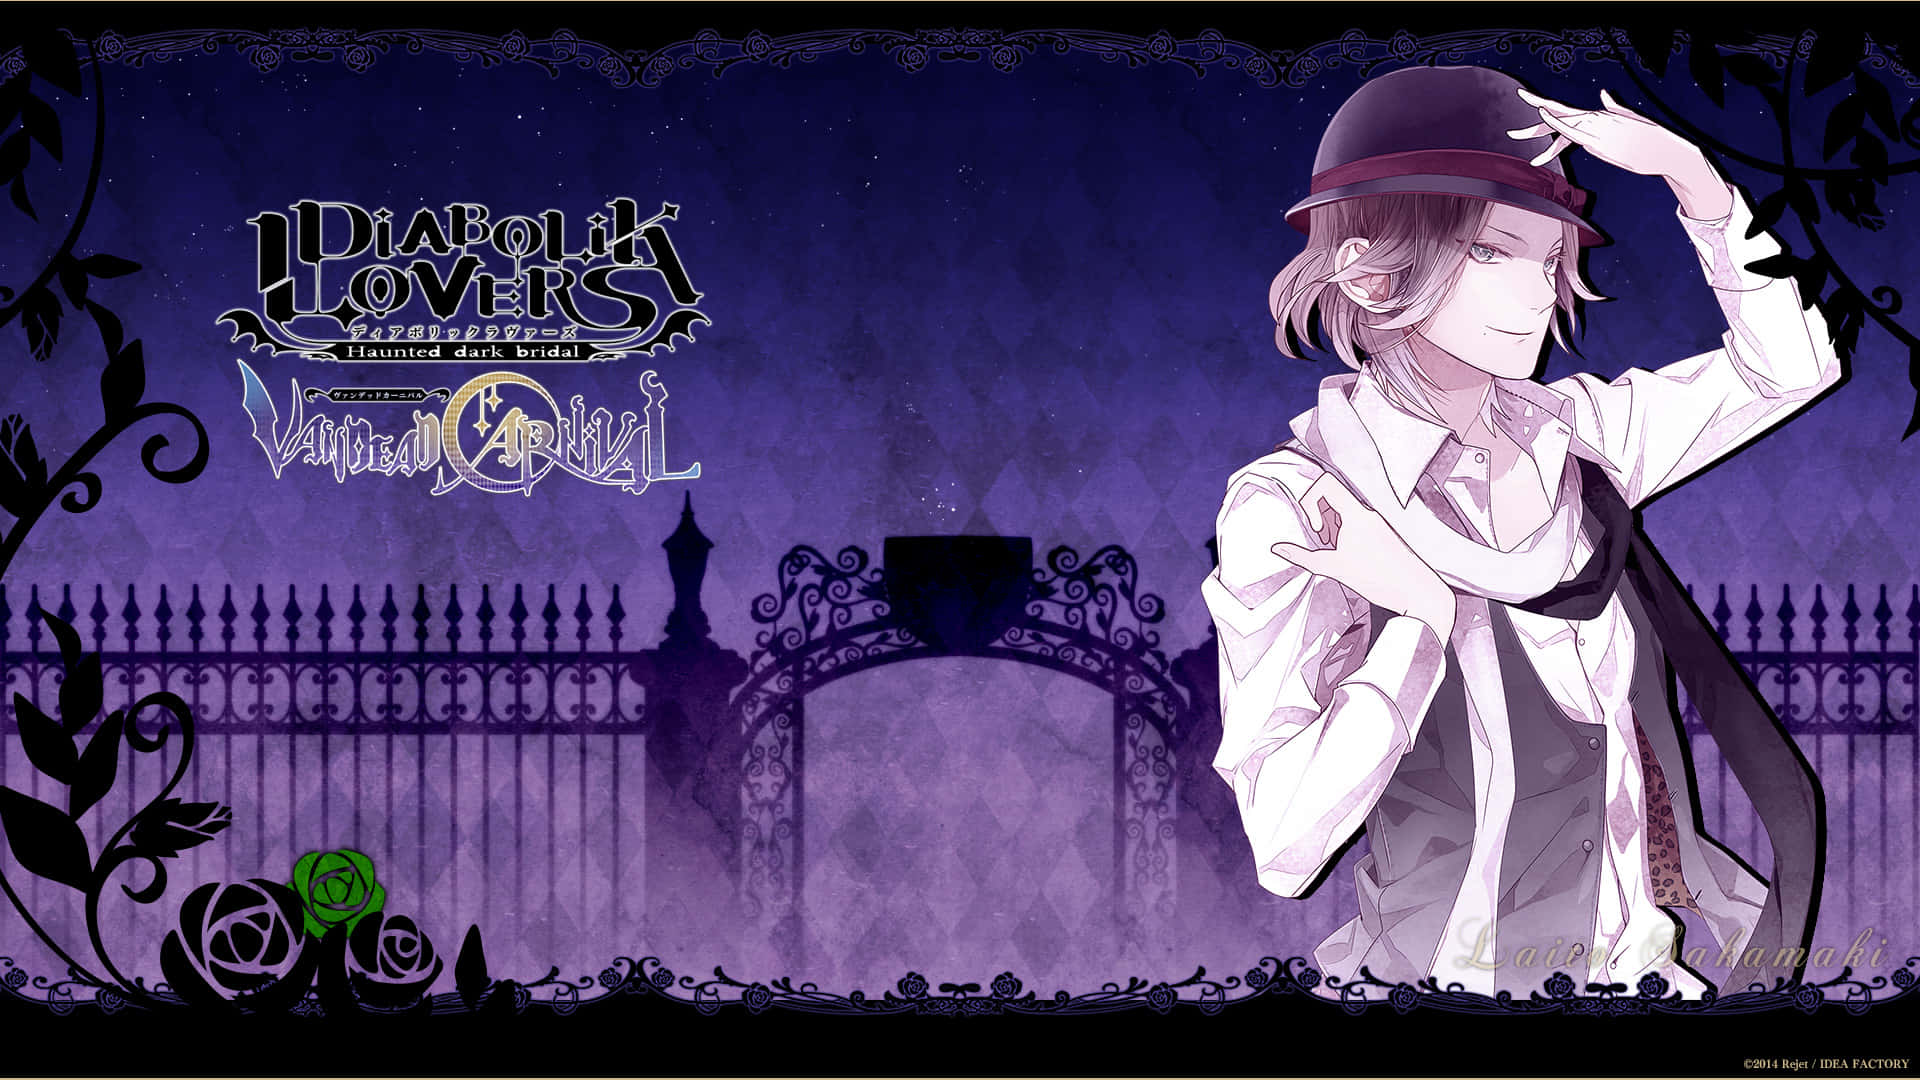 Dive into the dark world of Diabolik Lovers characters